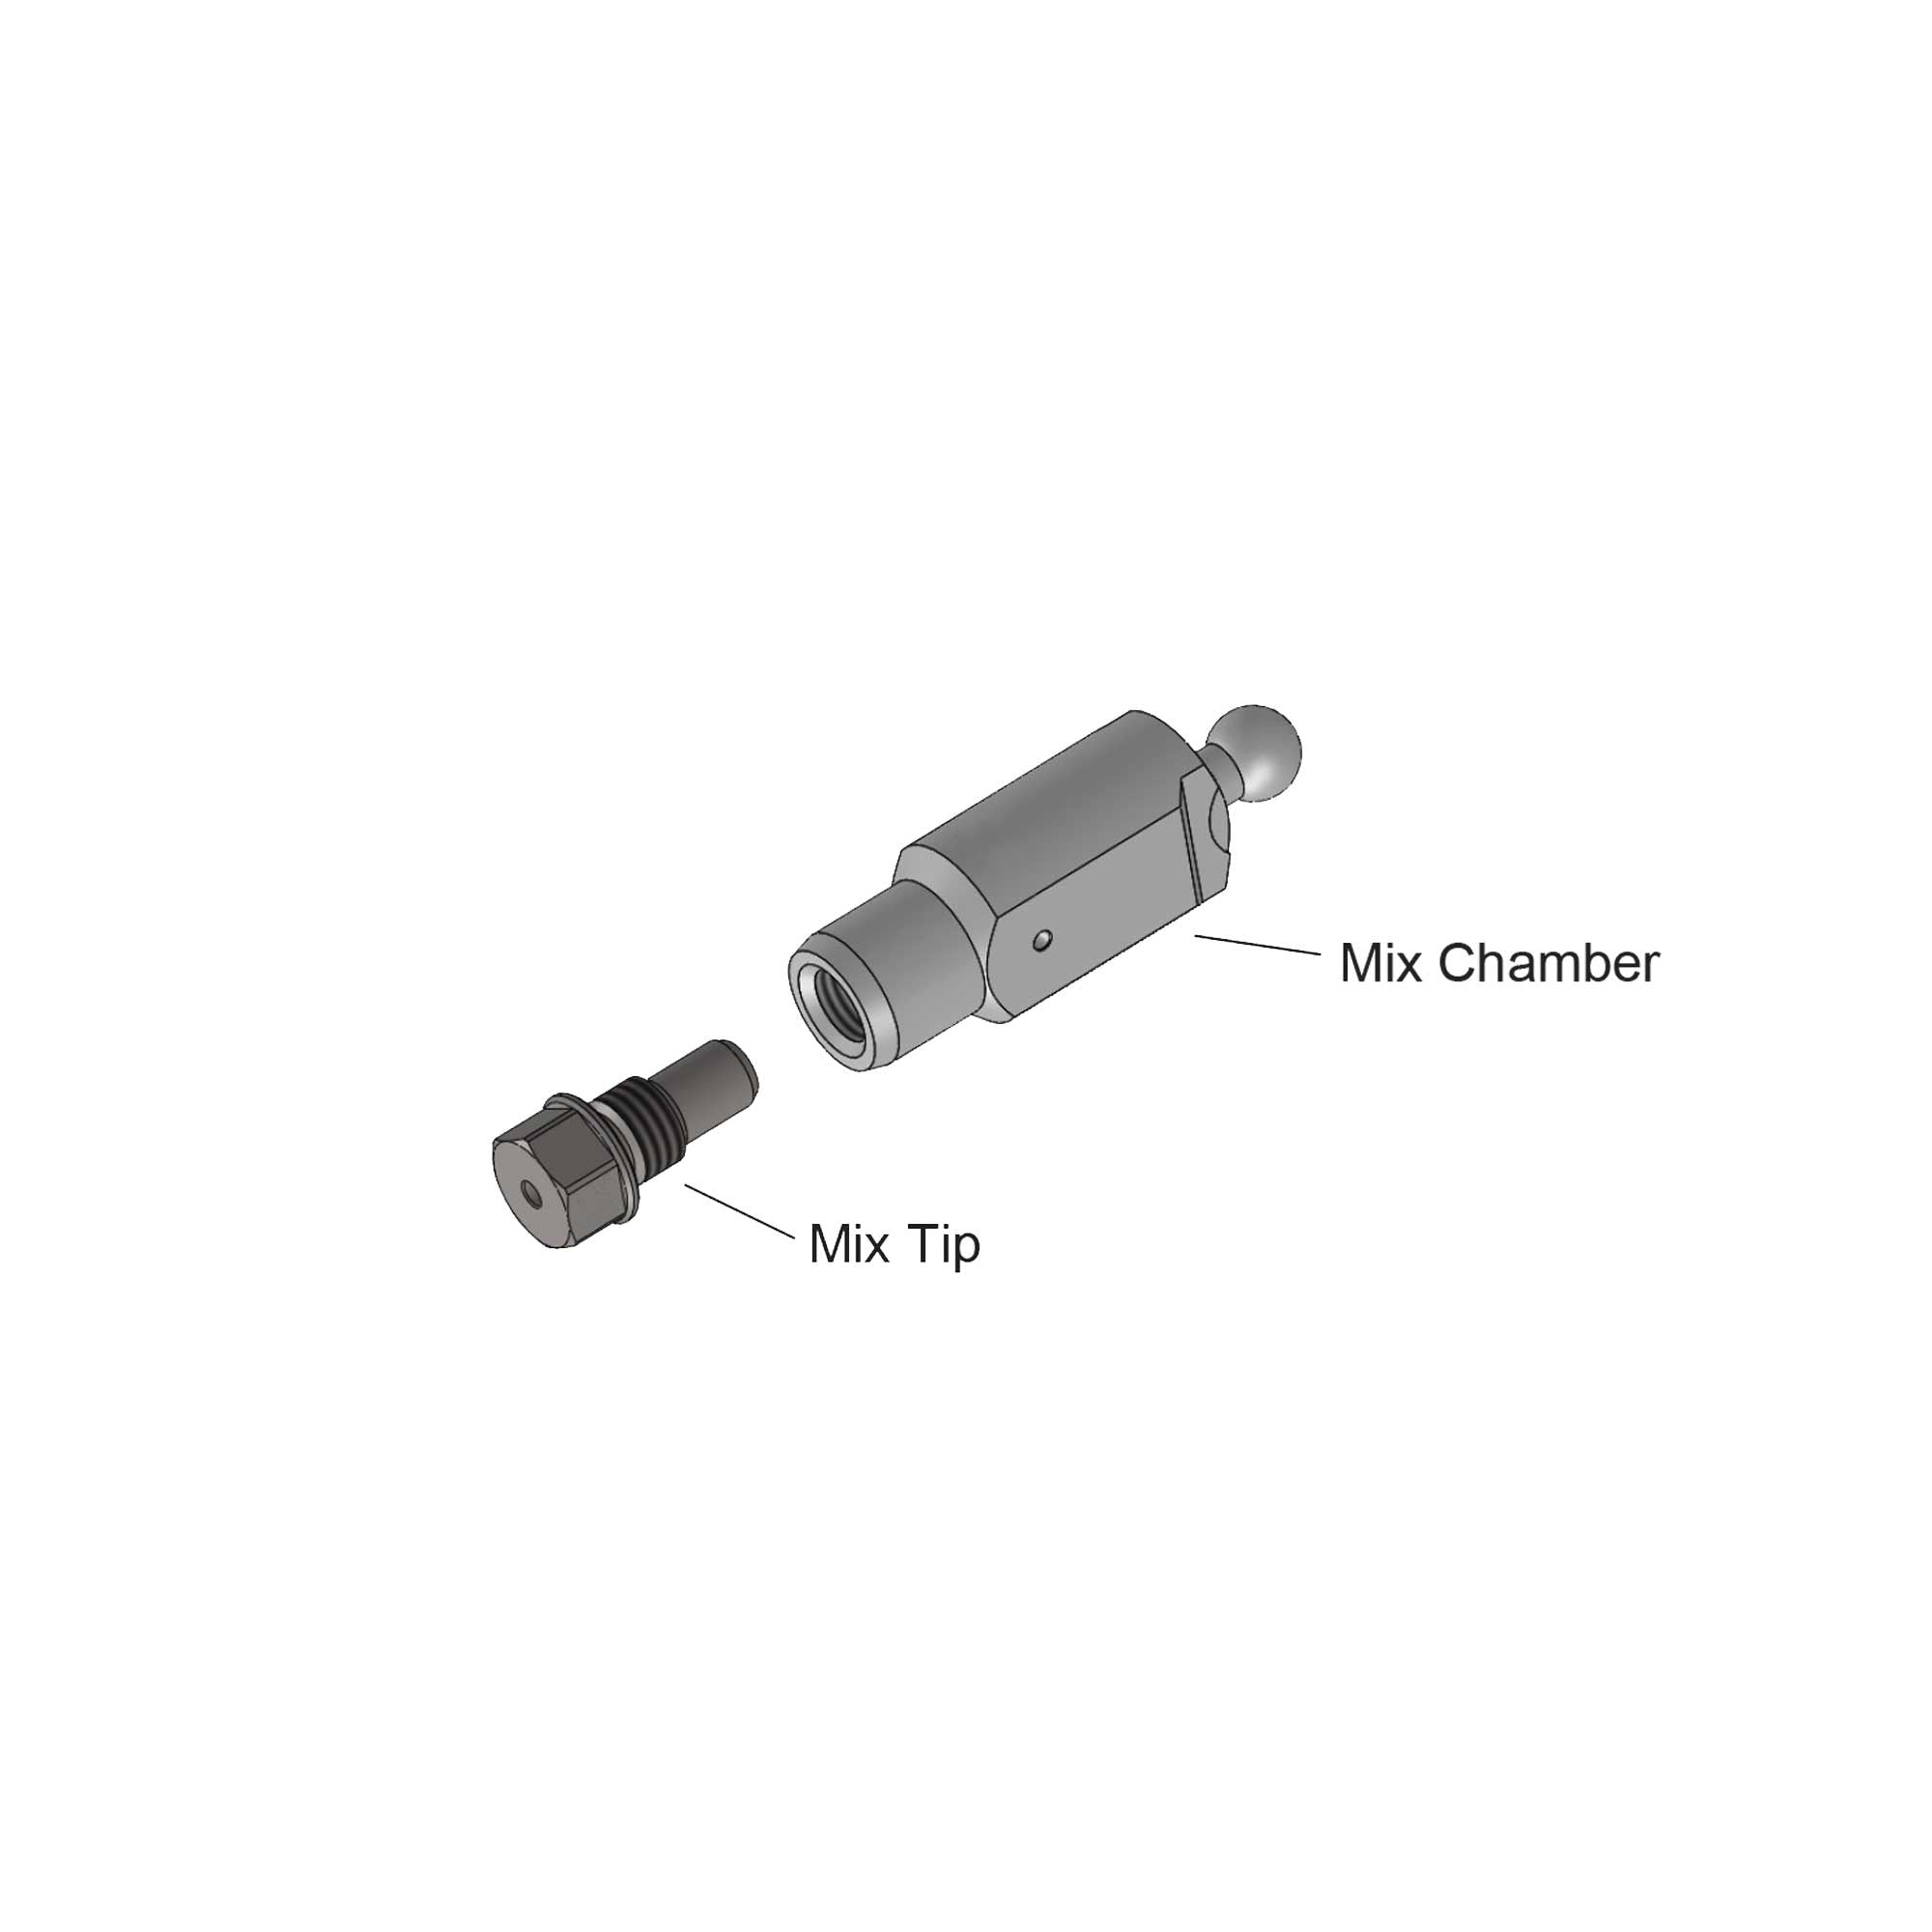 336442 - Mix Chamber C 15 and Tip Kit - PURspray